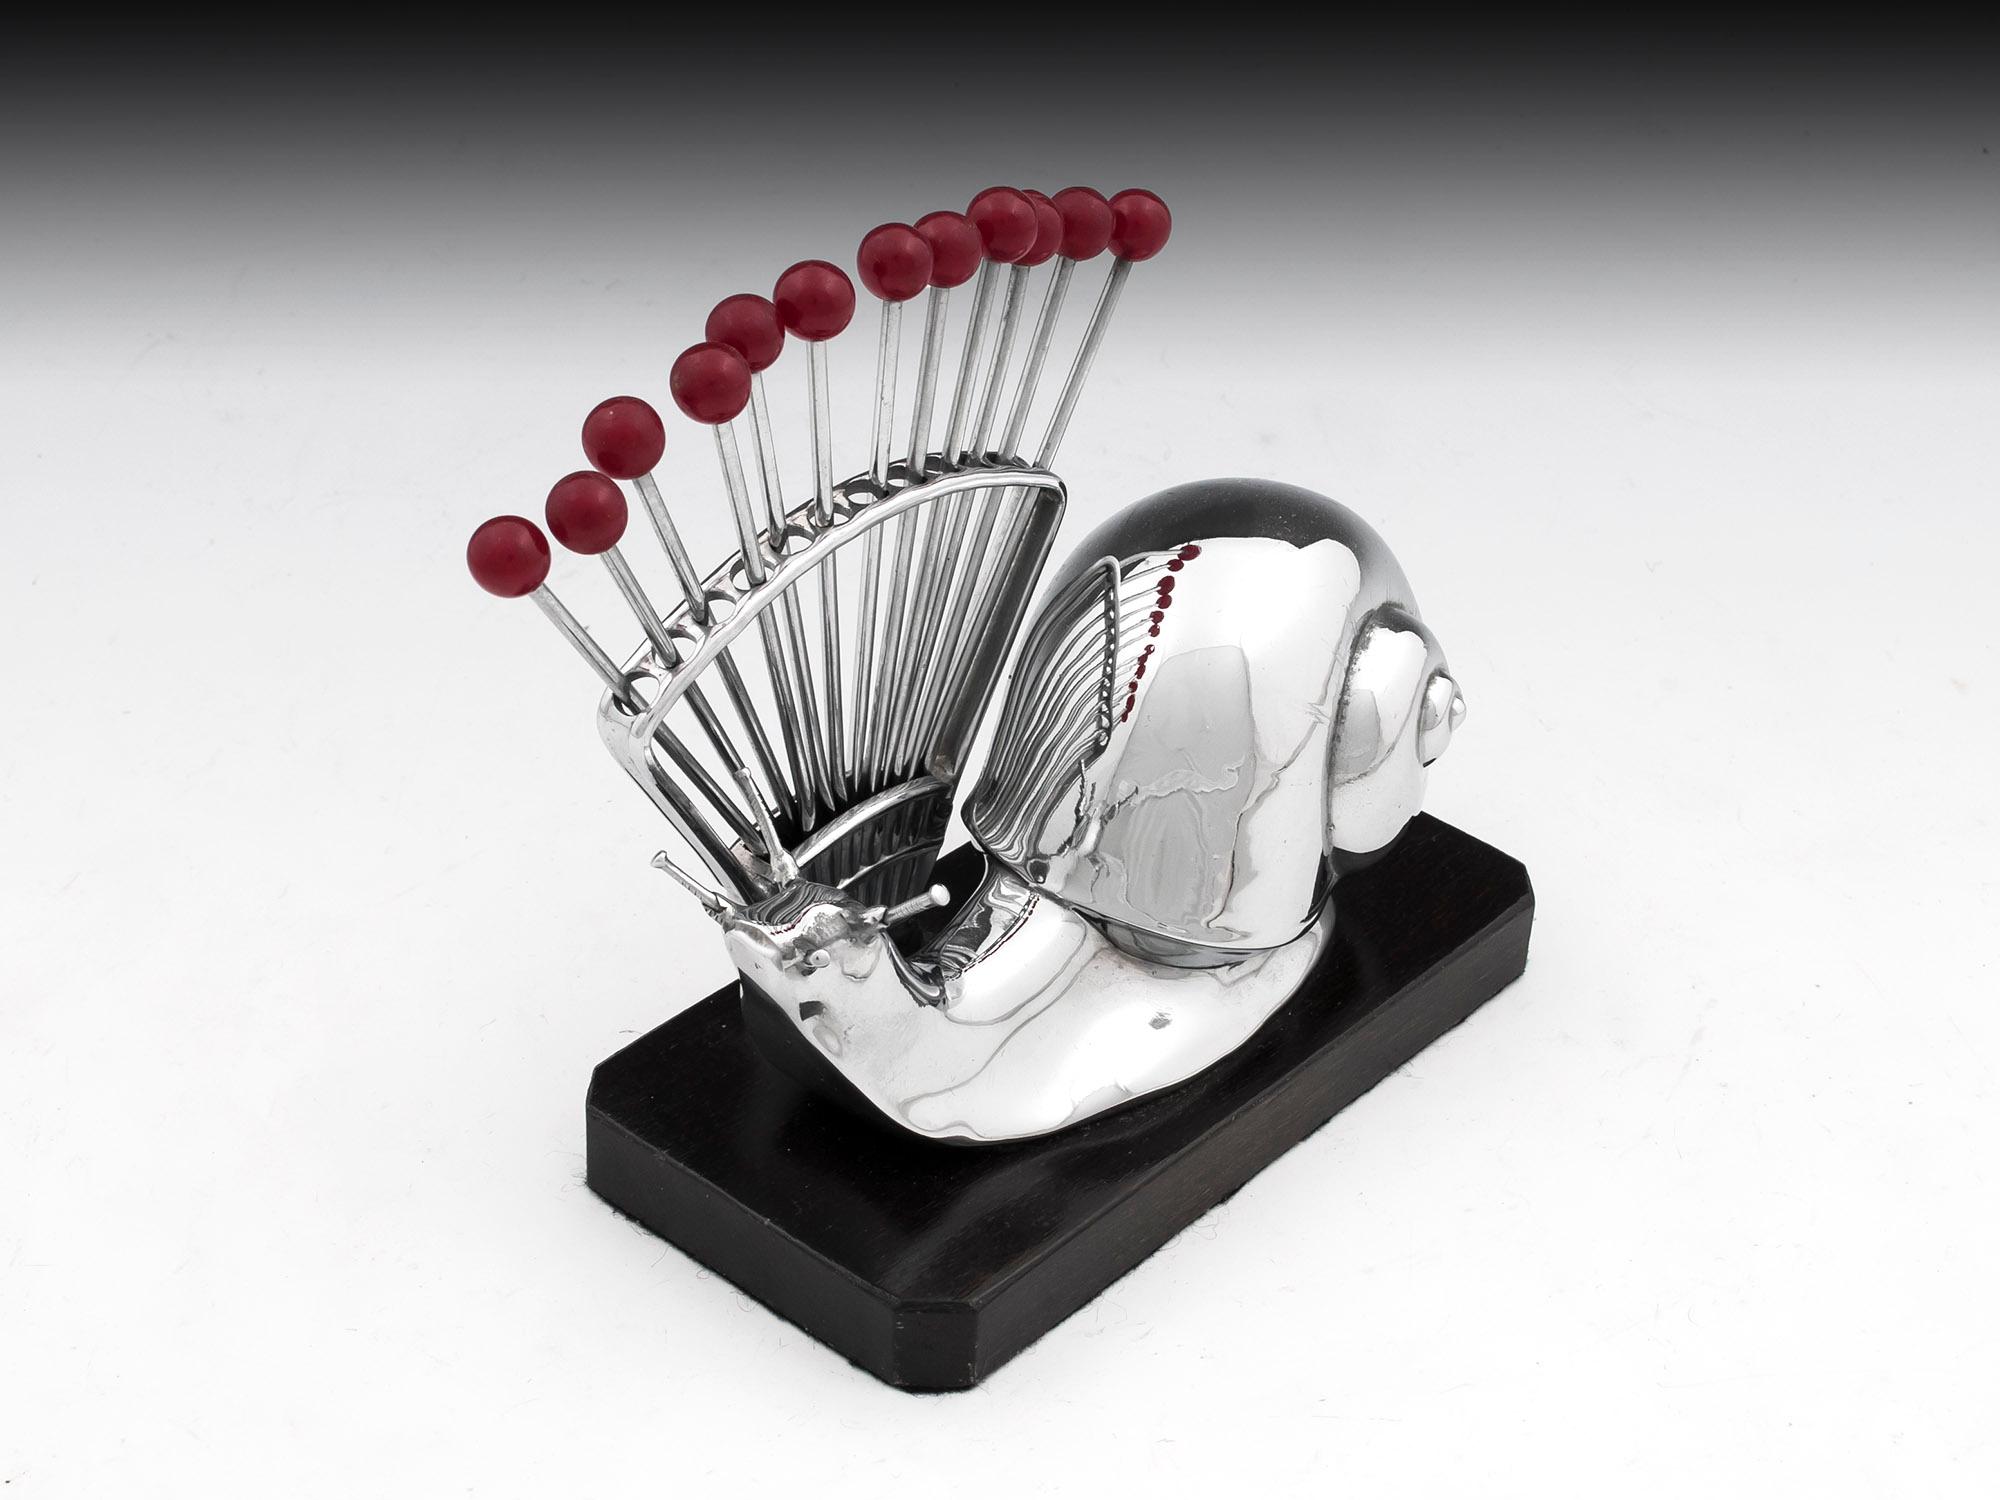 Art Deco chromium plated cocktail stick holder in the form of a snail. Containing twelve cherry topped cocktail sticks, standing on a ebonized plinth.